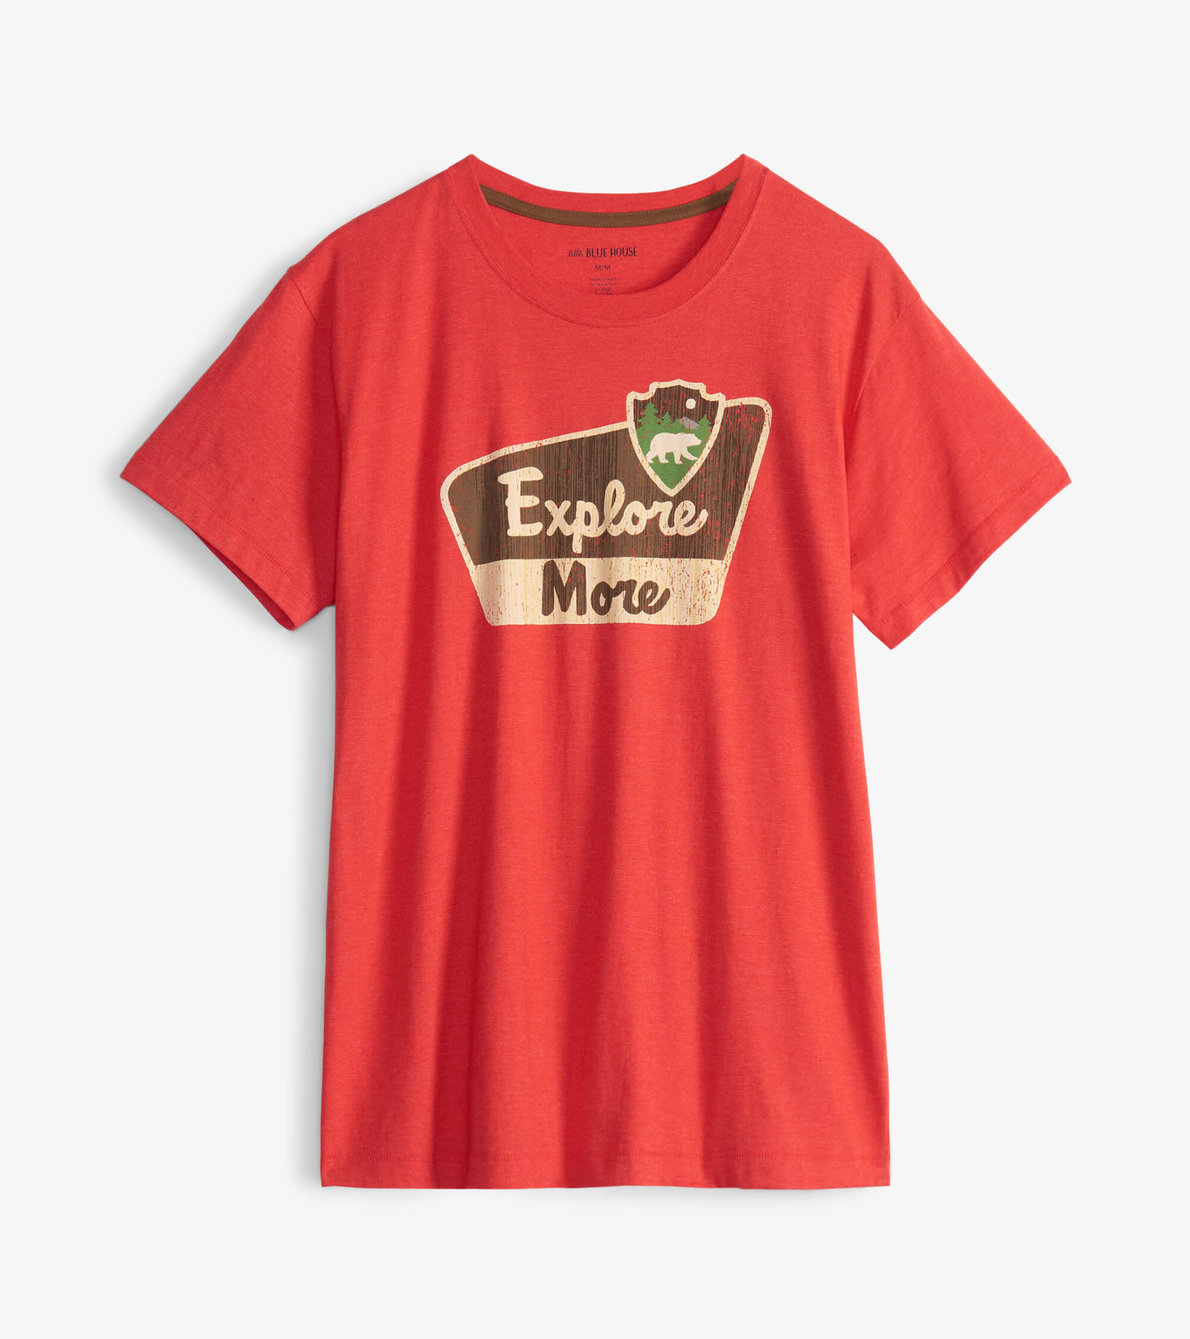 View larger image of Explore More Men's Tee